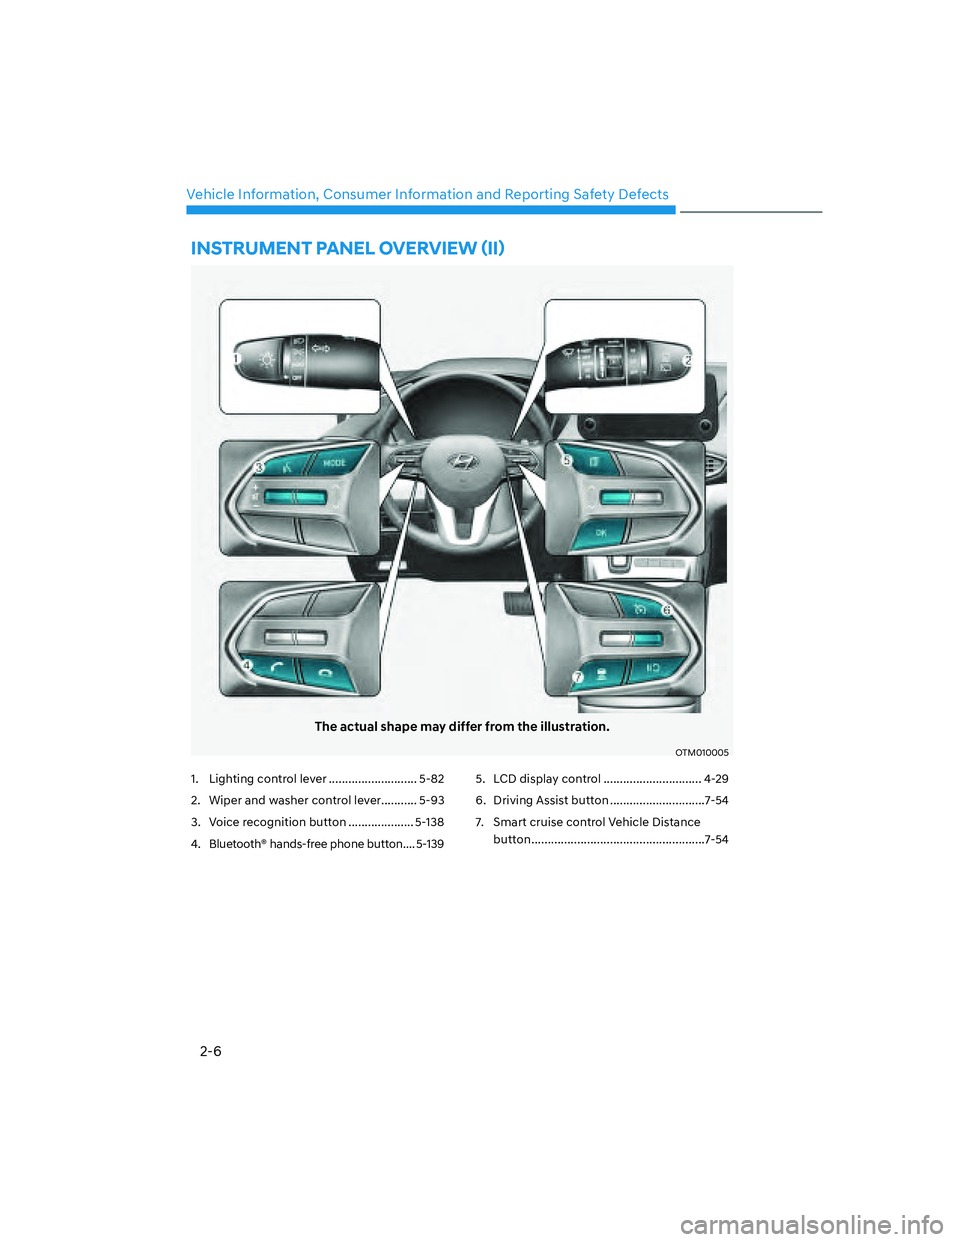 HYUNDAI SANTA FE 2022  Owners Manual 2-6
Vehicle Information, Consumer Information and Reporting Safety Defects
The actual shape may differ from the illustration.
OTM010005
1.  Lighting control lever ........................... 5-82
2.  